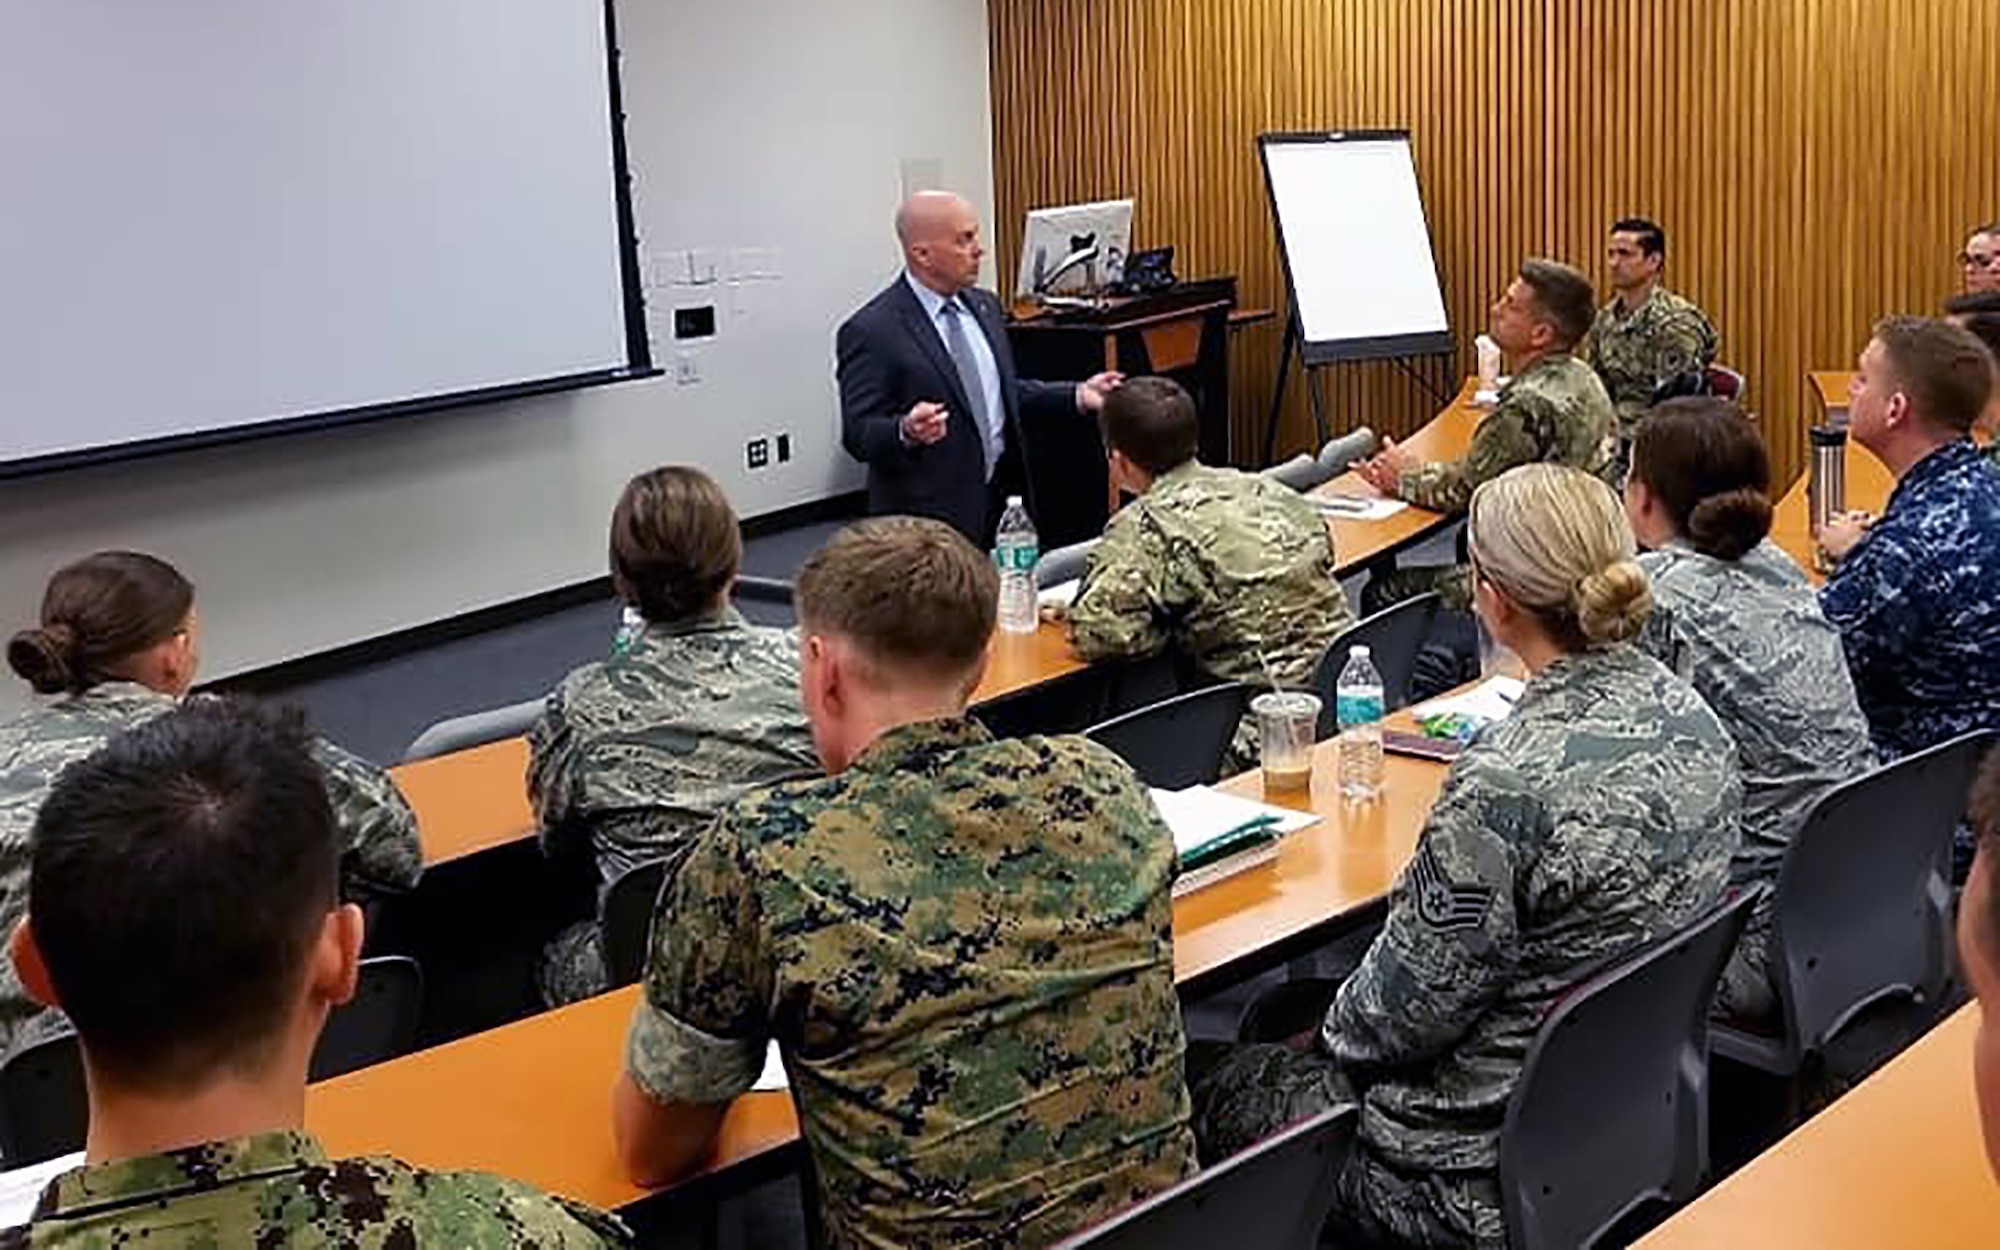 Dr. Richard Thomas, president of the Uniformed Services University, welcomed a new class of Enlisted to Medical School Preparatory Program, or EMDP2, students to campus in this 2019 photo.